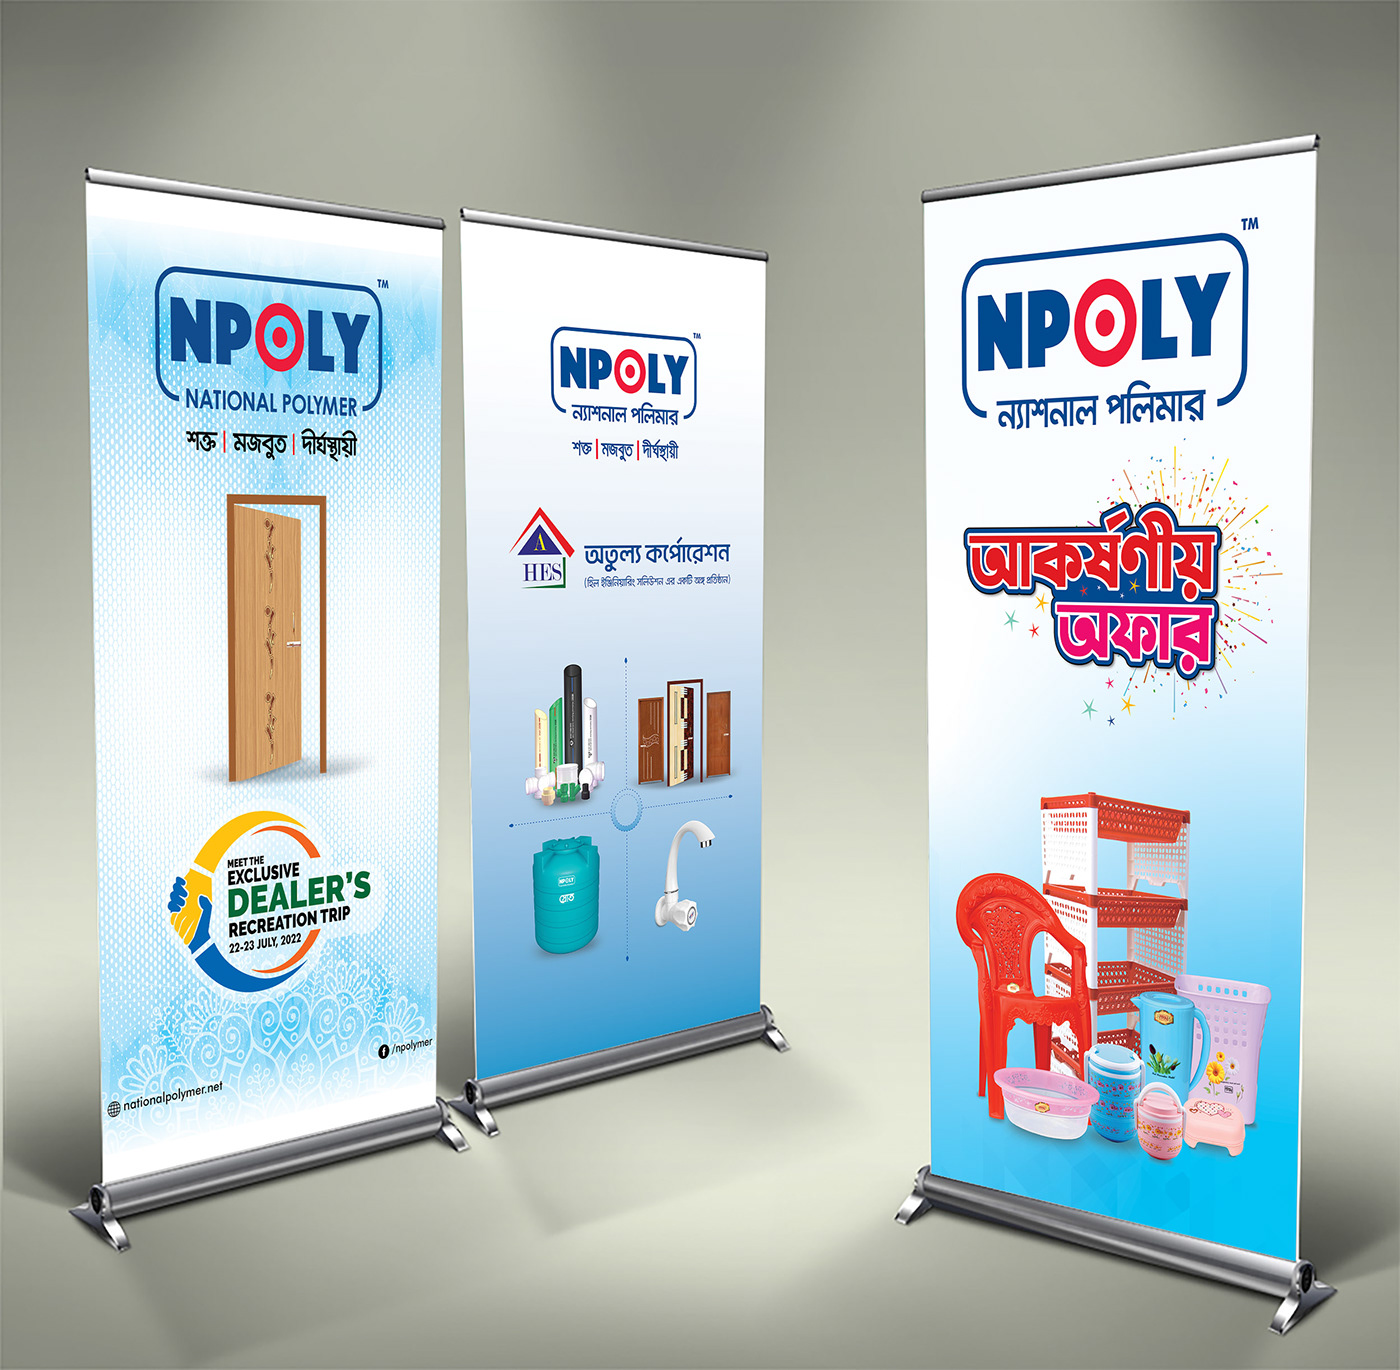 roll up banner Mockup free download rollup free download Mockup Free Download graphic design 